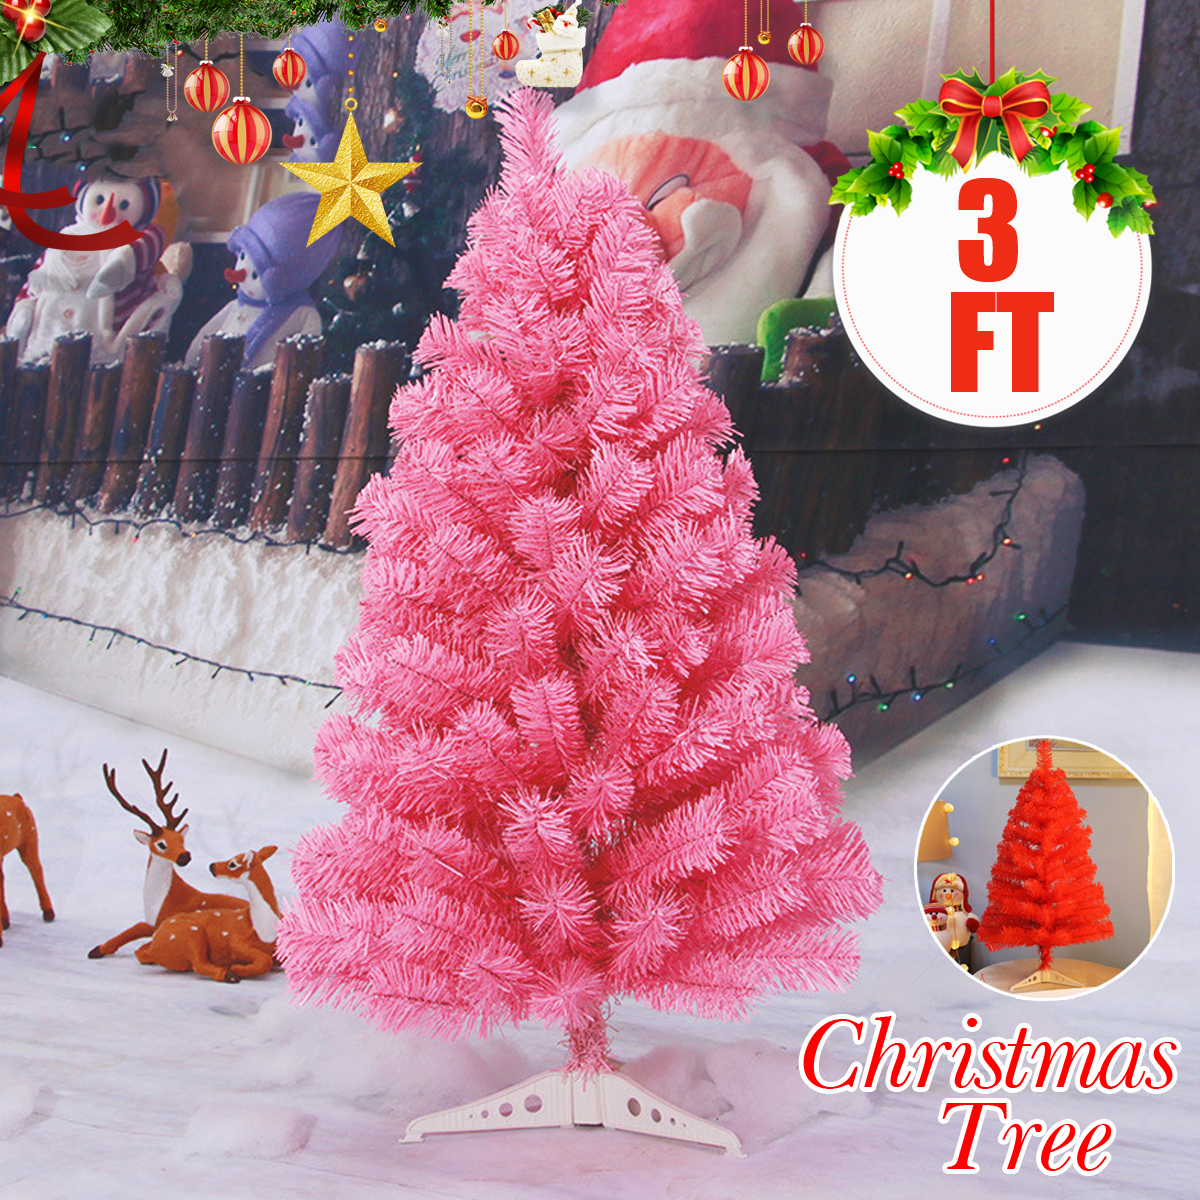 Christmas-Tree-3FT-Xmas-Decor-For-Childrens--Toddler-Play-Decorations-Home-1605826-2